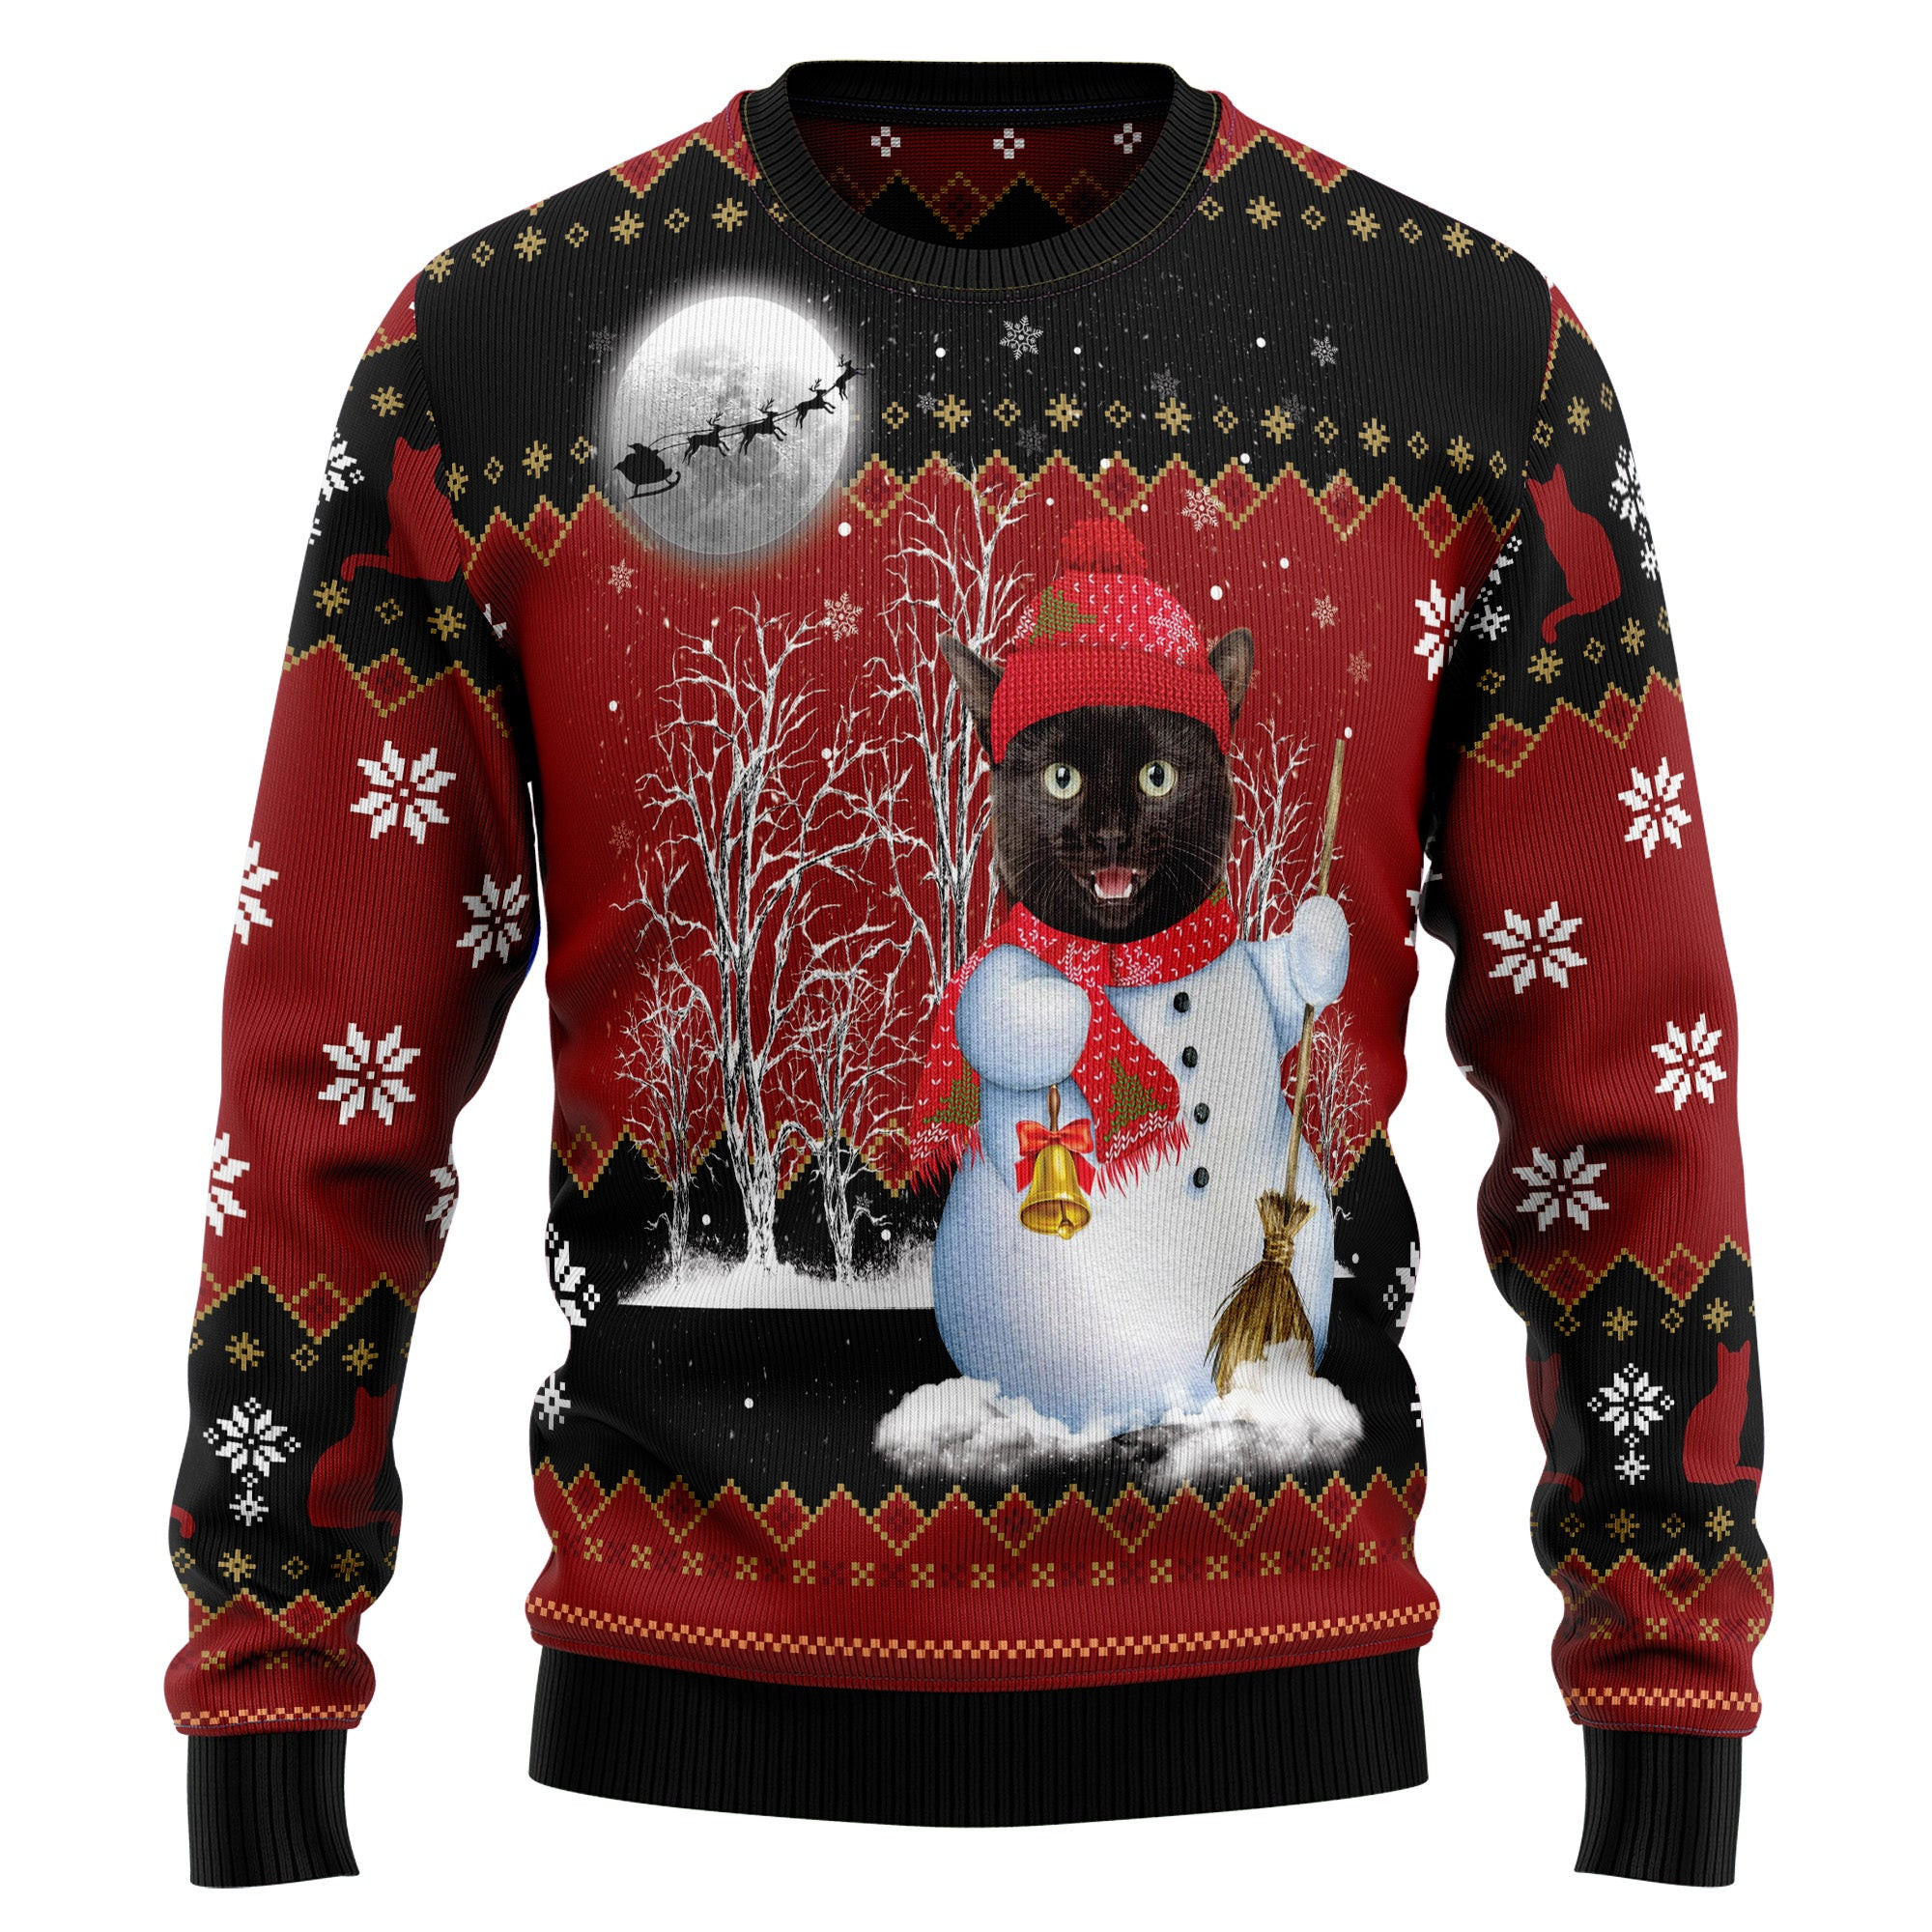 Black Cat Snowman Ugly Christmas Sweater, Ugly Sweater For Men Women, Holiday Sweater